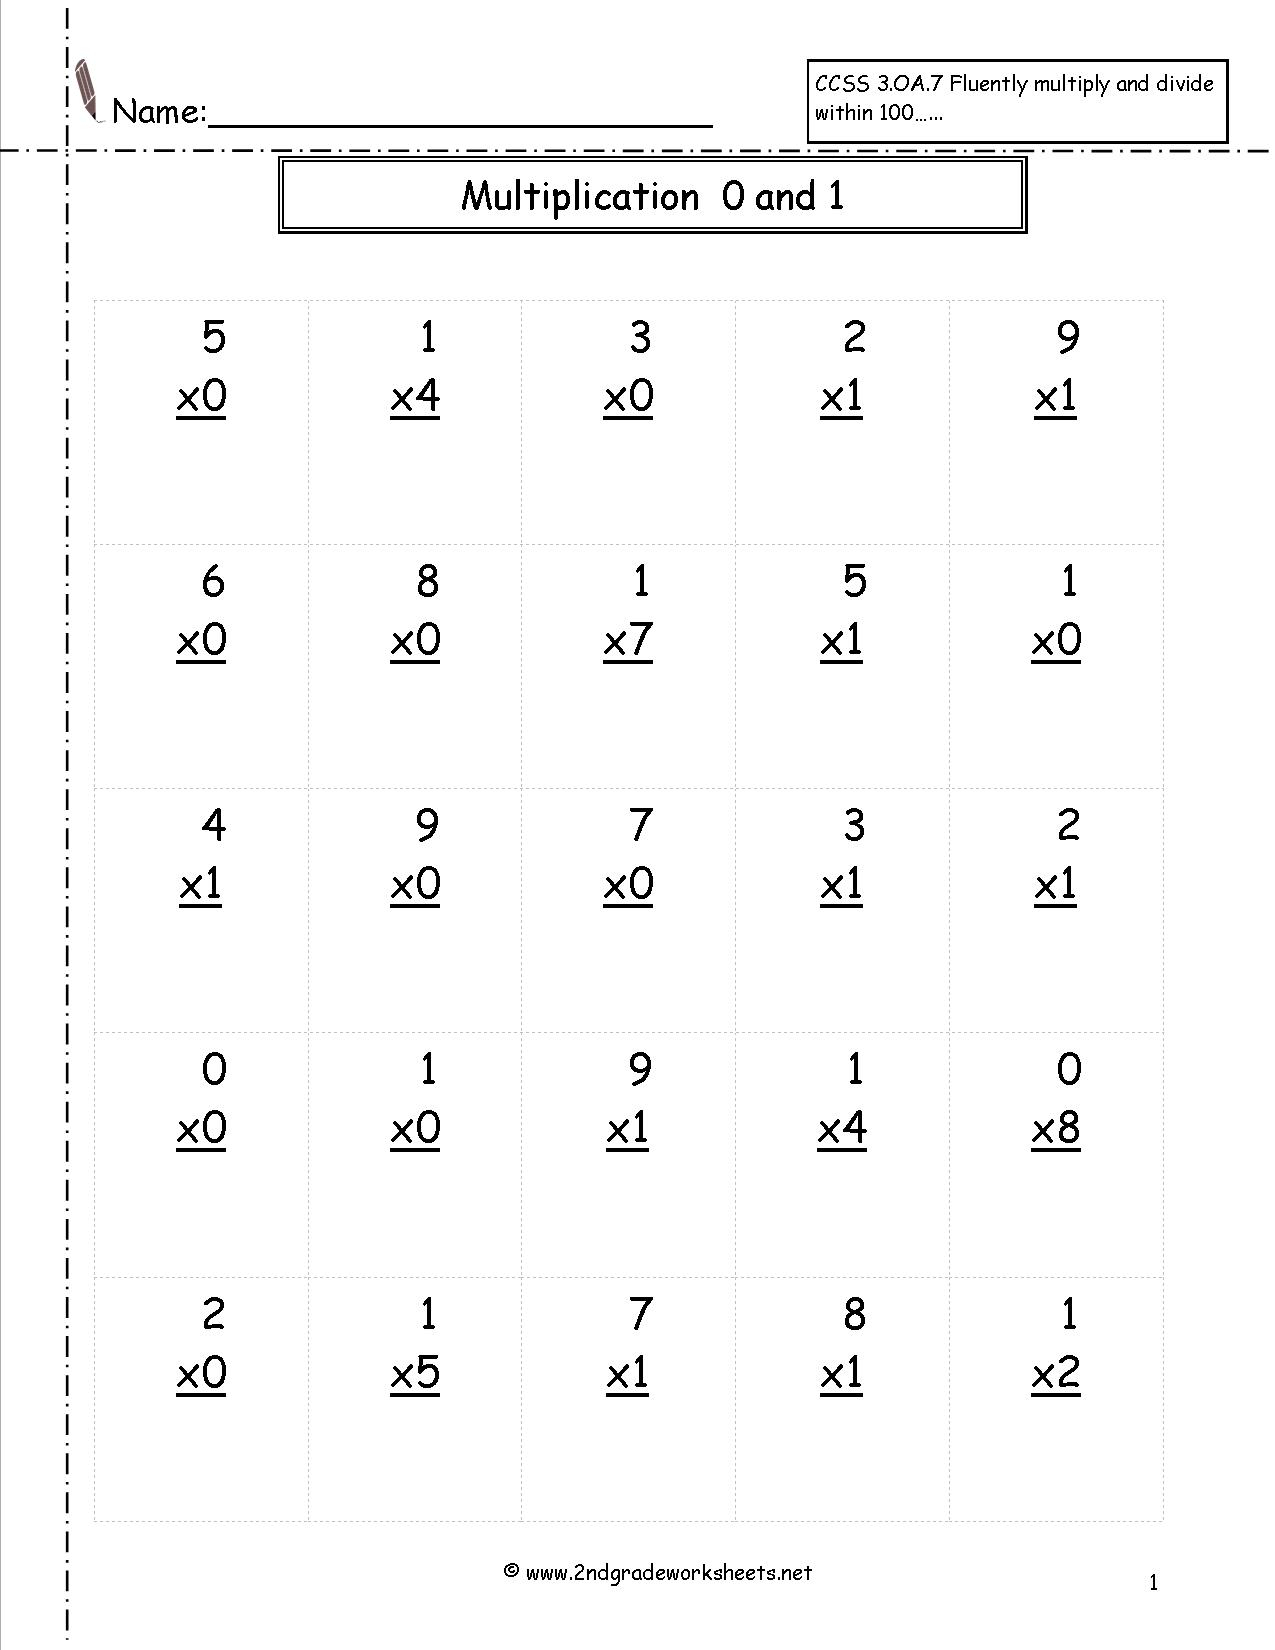 Multiplication Worksheets And Printouts within Printable Multiplication Test